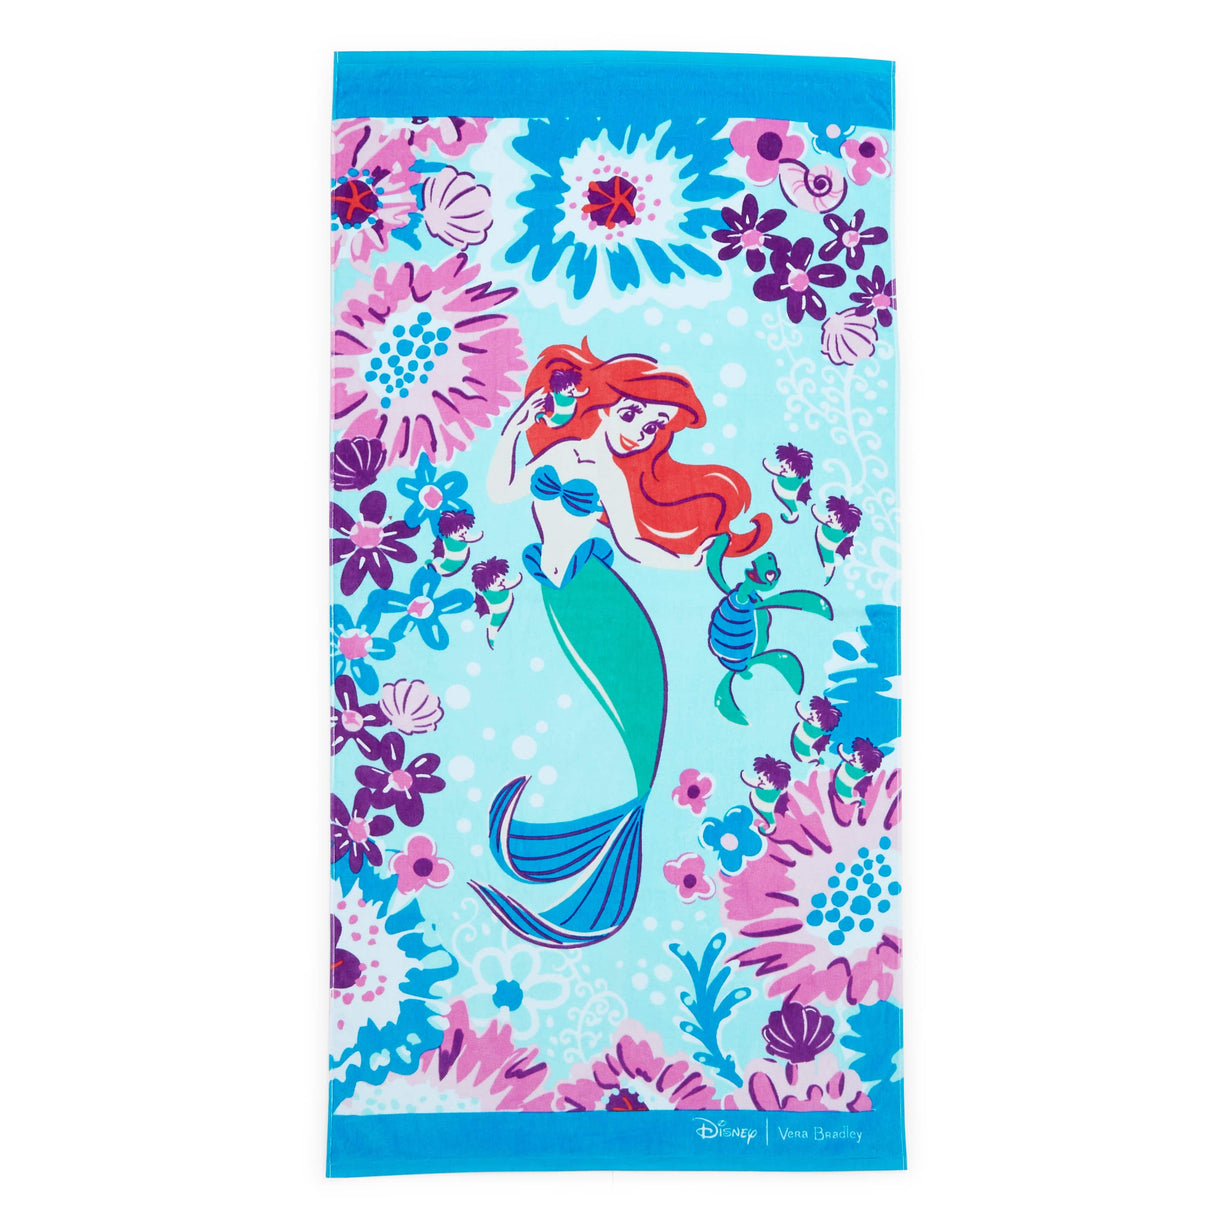 Disney Cat and Disney Dog Towels Are Here to Make Your Kitchen SO Cute!